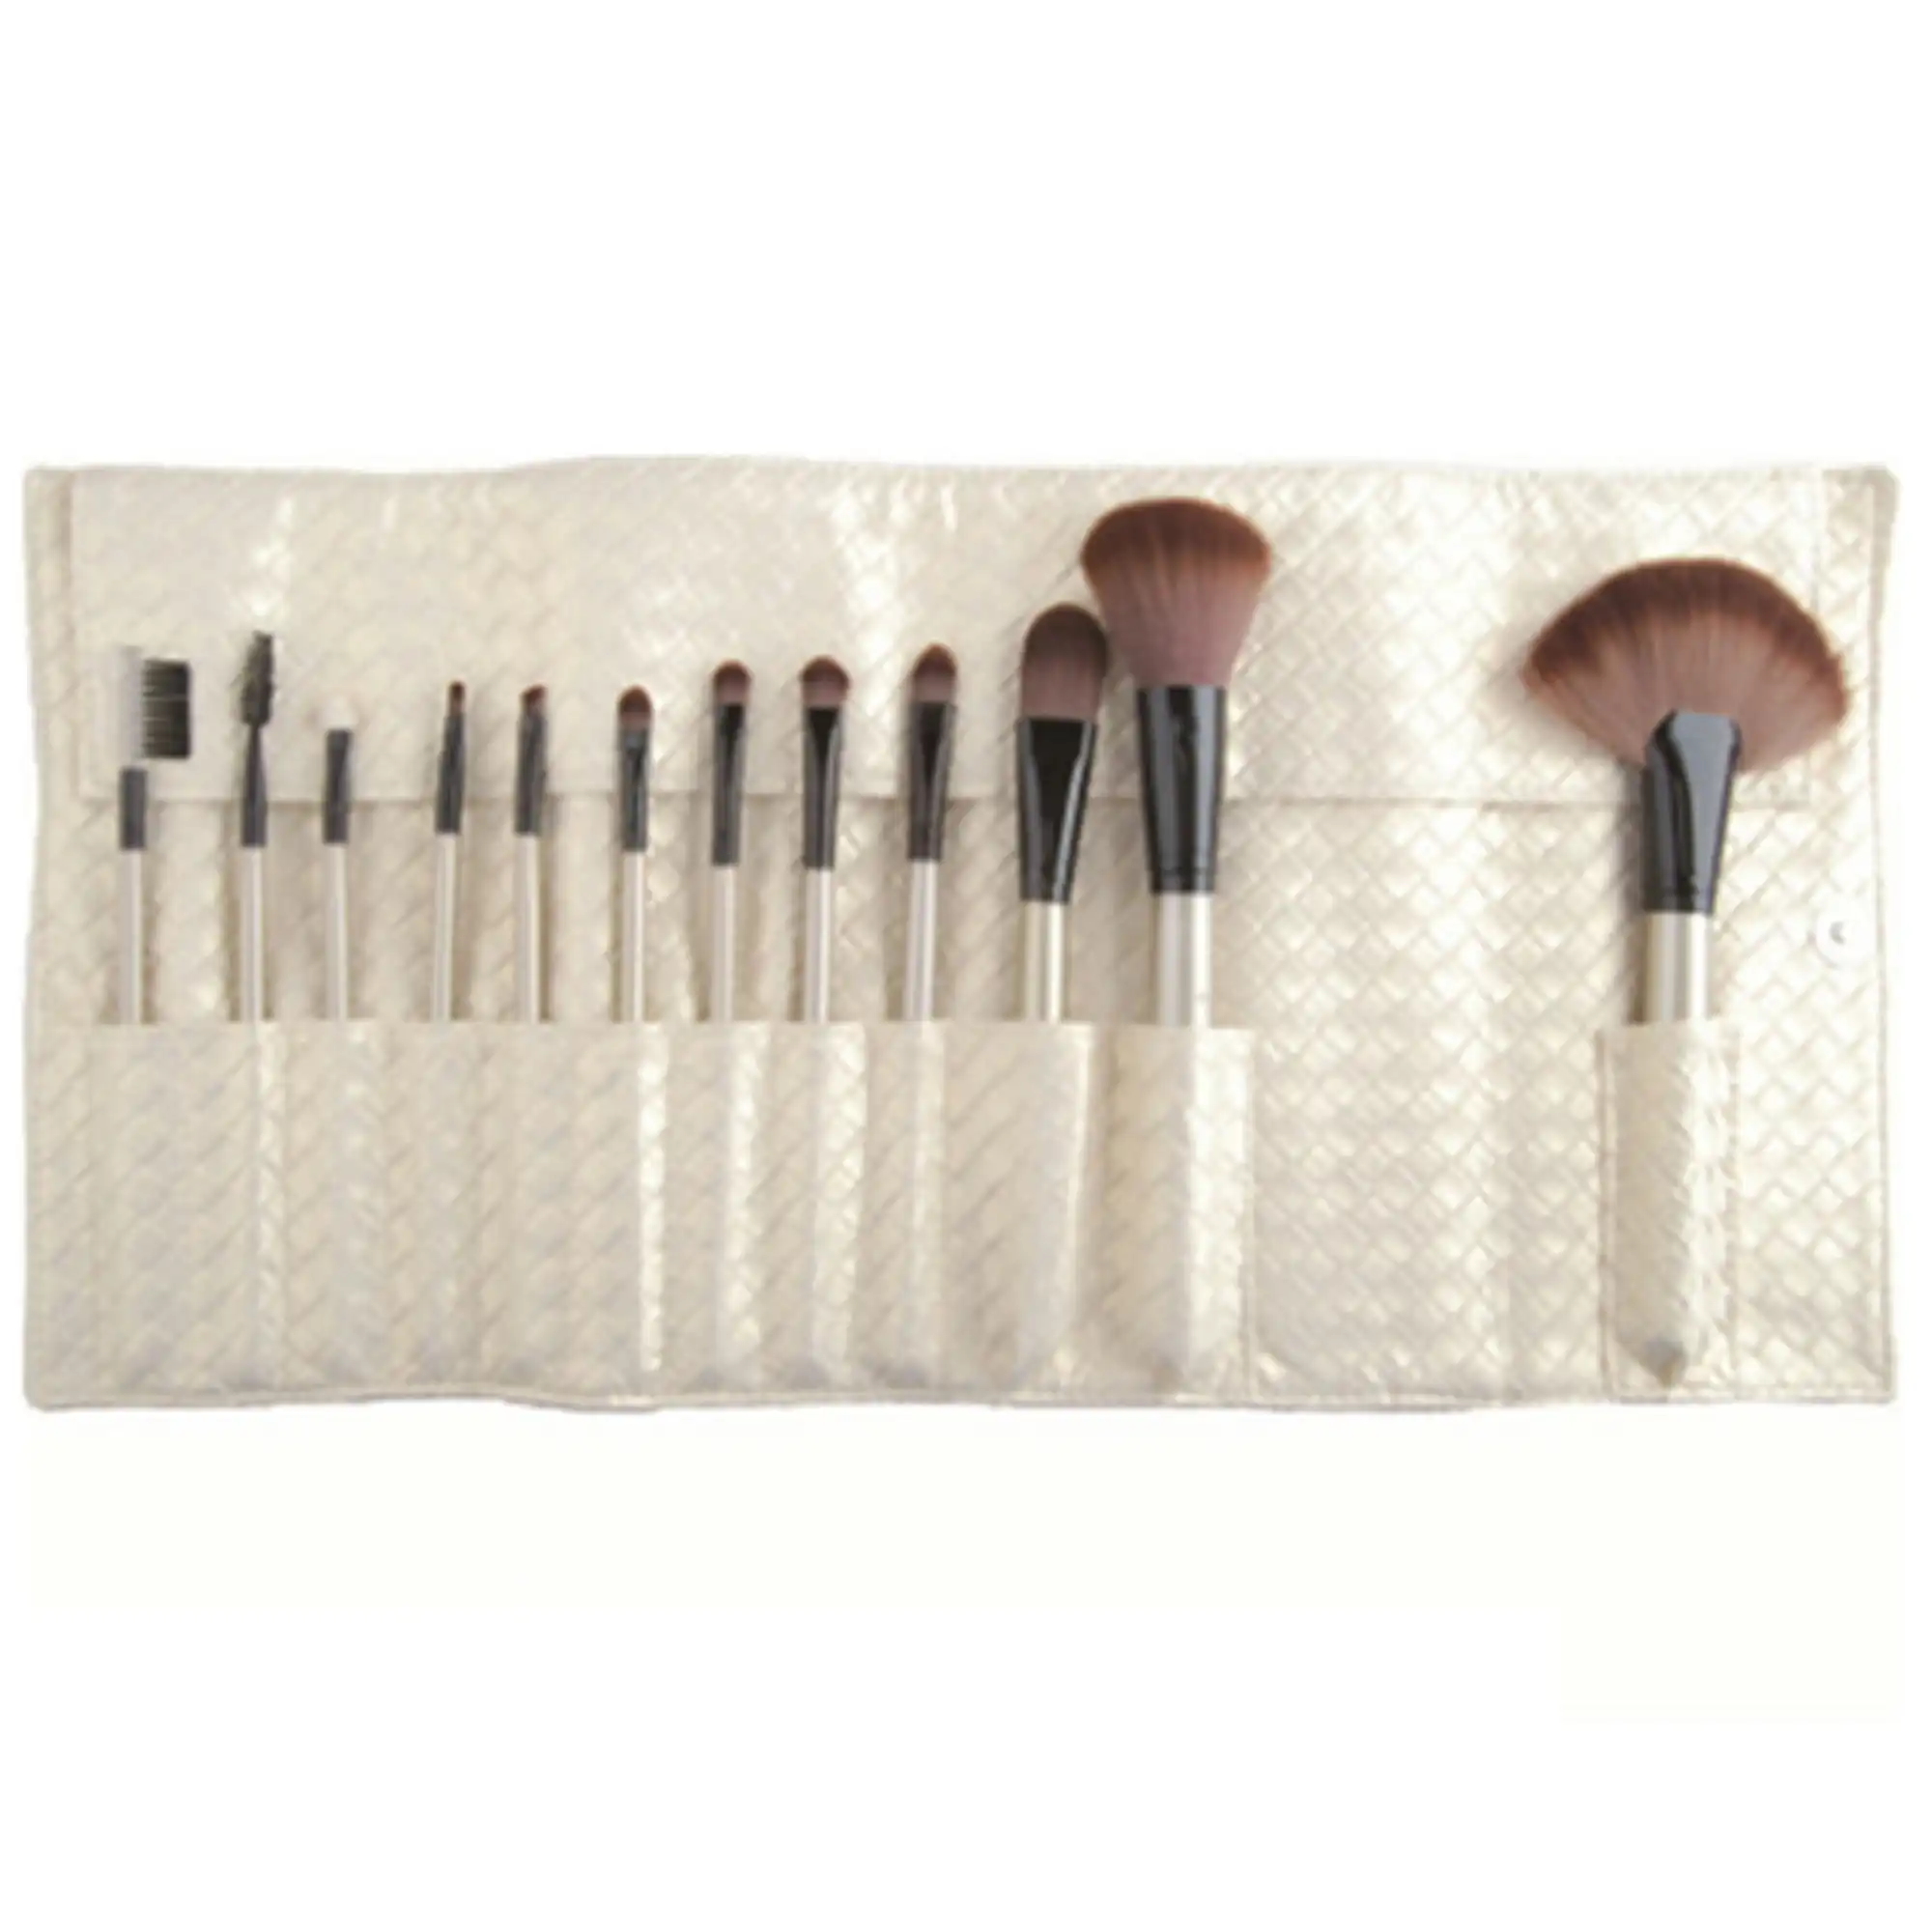 12 Piece Professional Makeup Brush Set Soft Bristle with Carry Case Pearl White